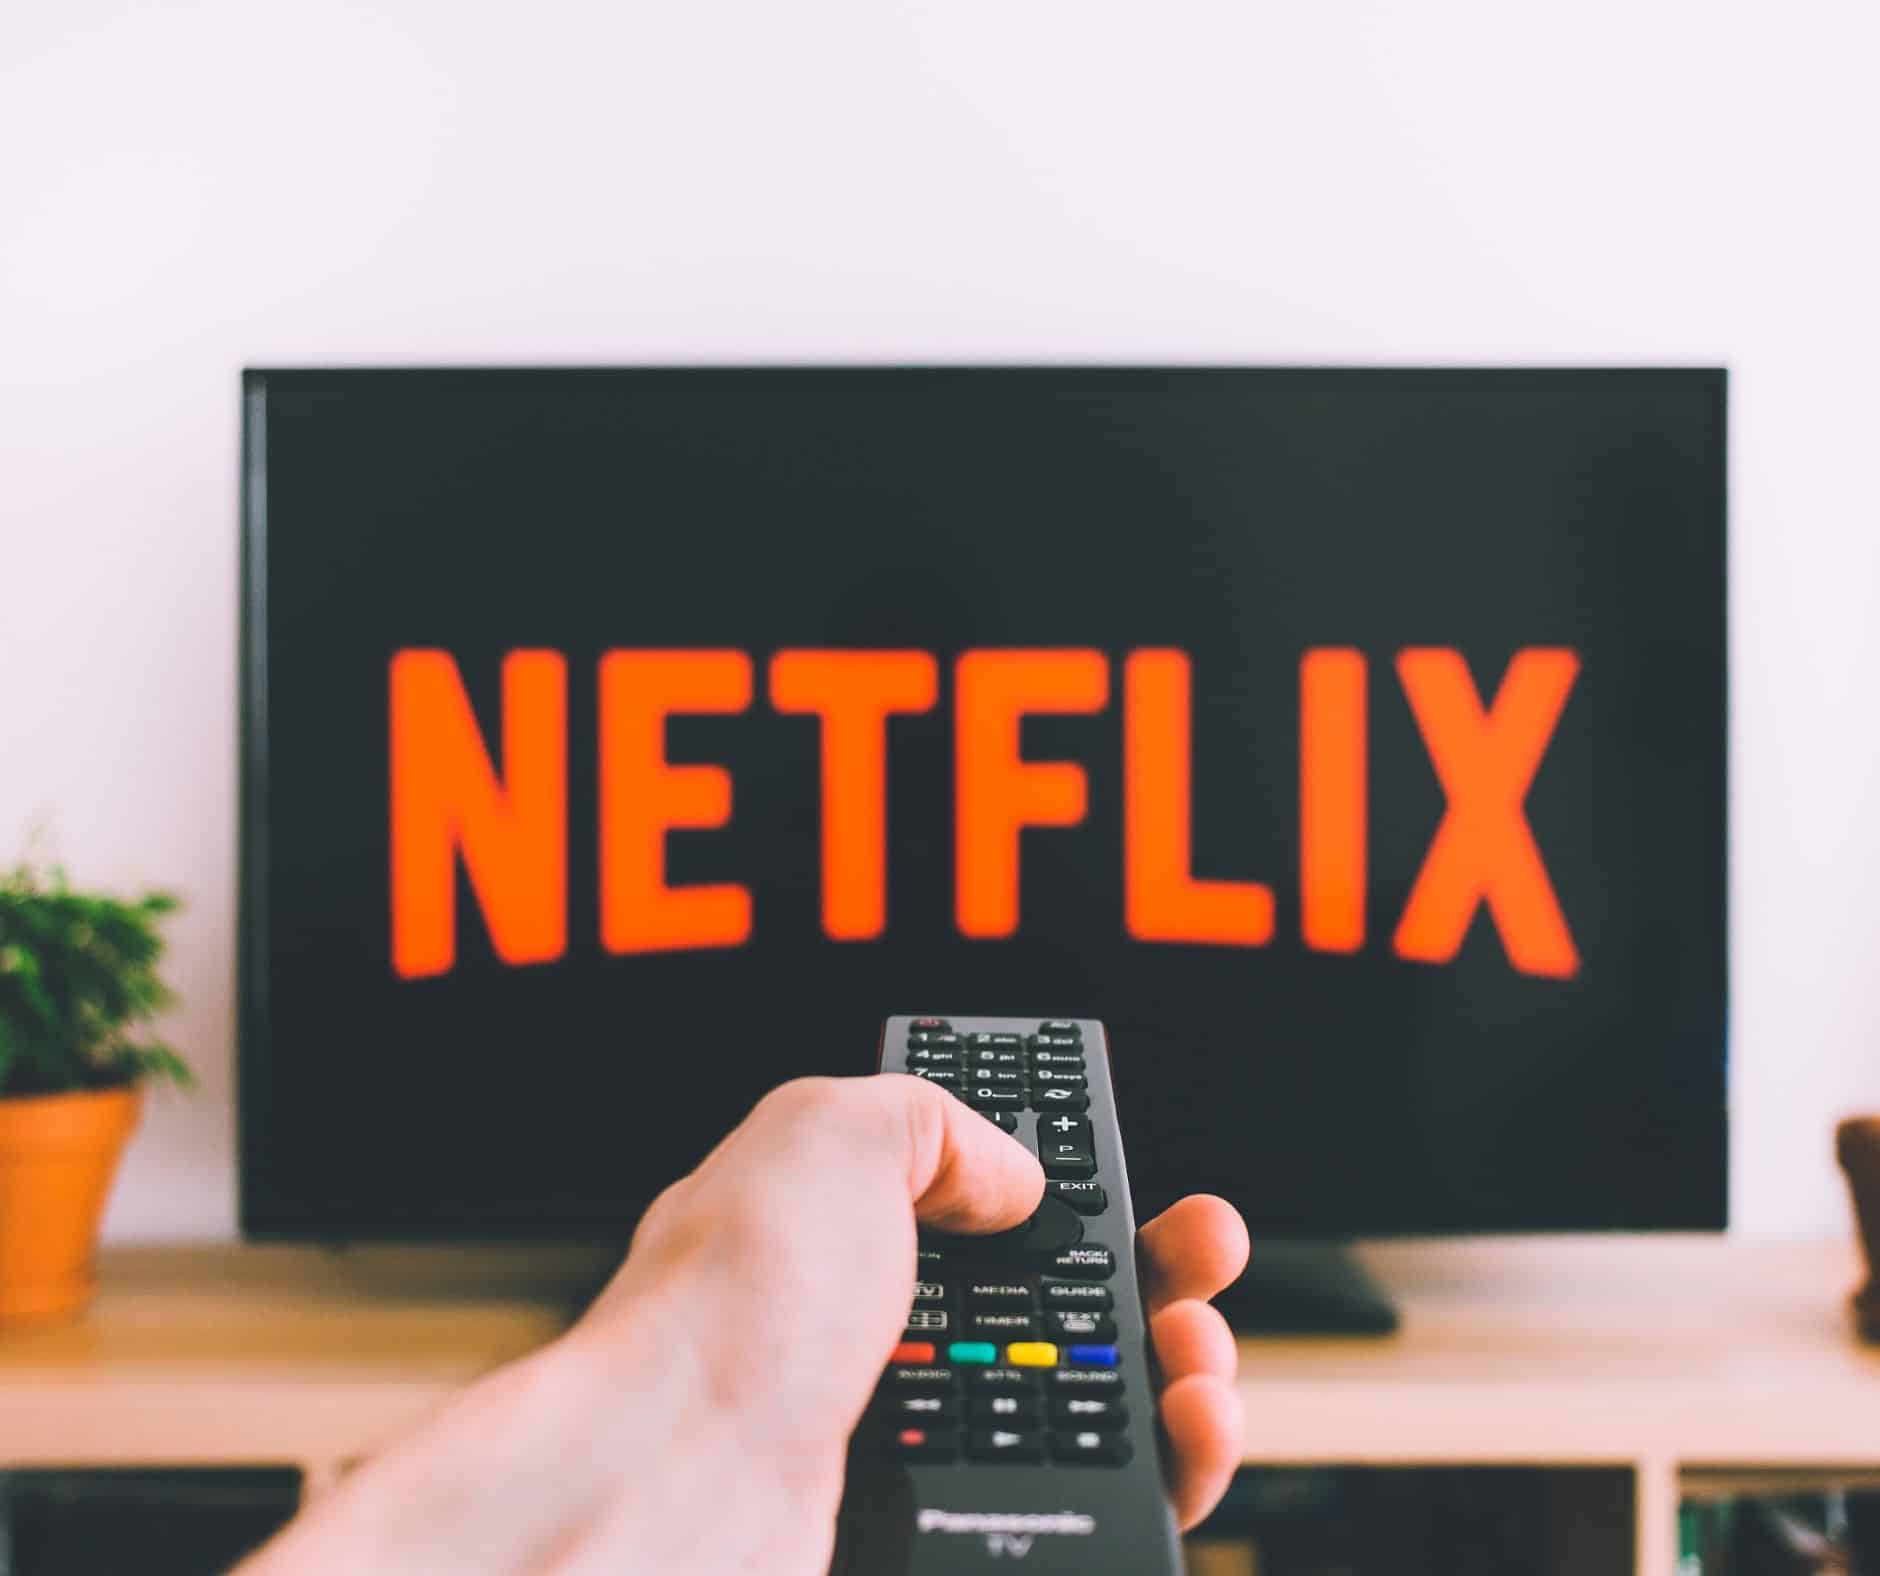 You're already paying for Netflix, so you might as well get your money worth. Check out these binge-worthy Netflix series worth checking out.